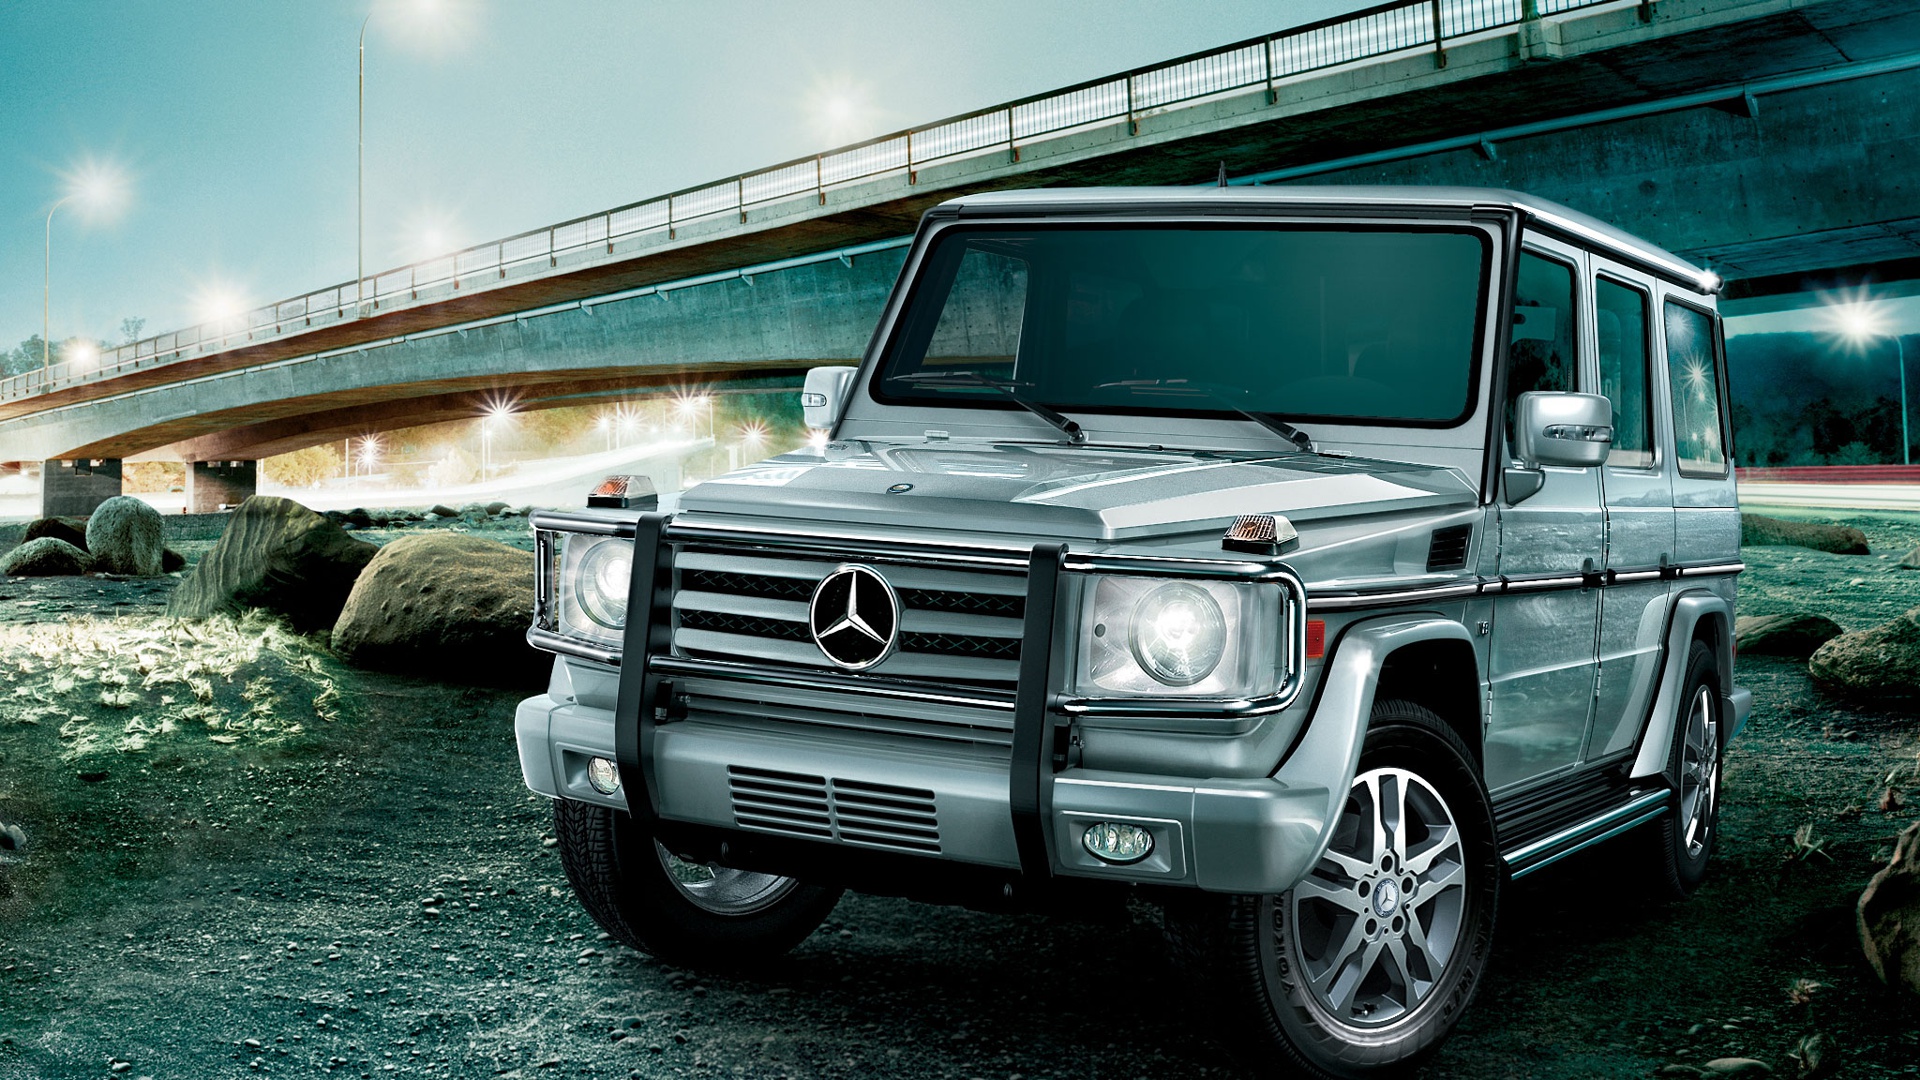 Mercedes Benz on HD Wallpapers backgrounds All cars on